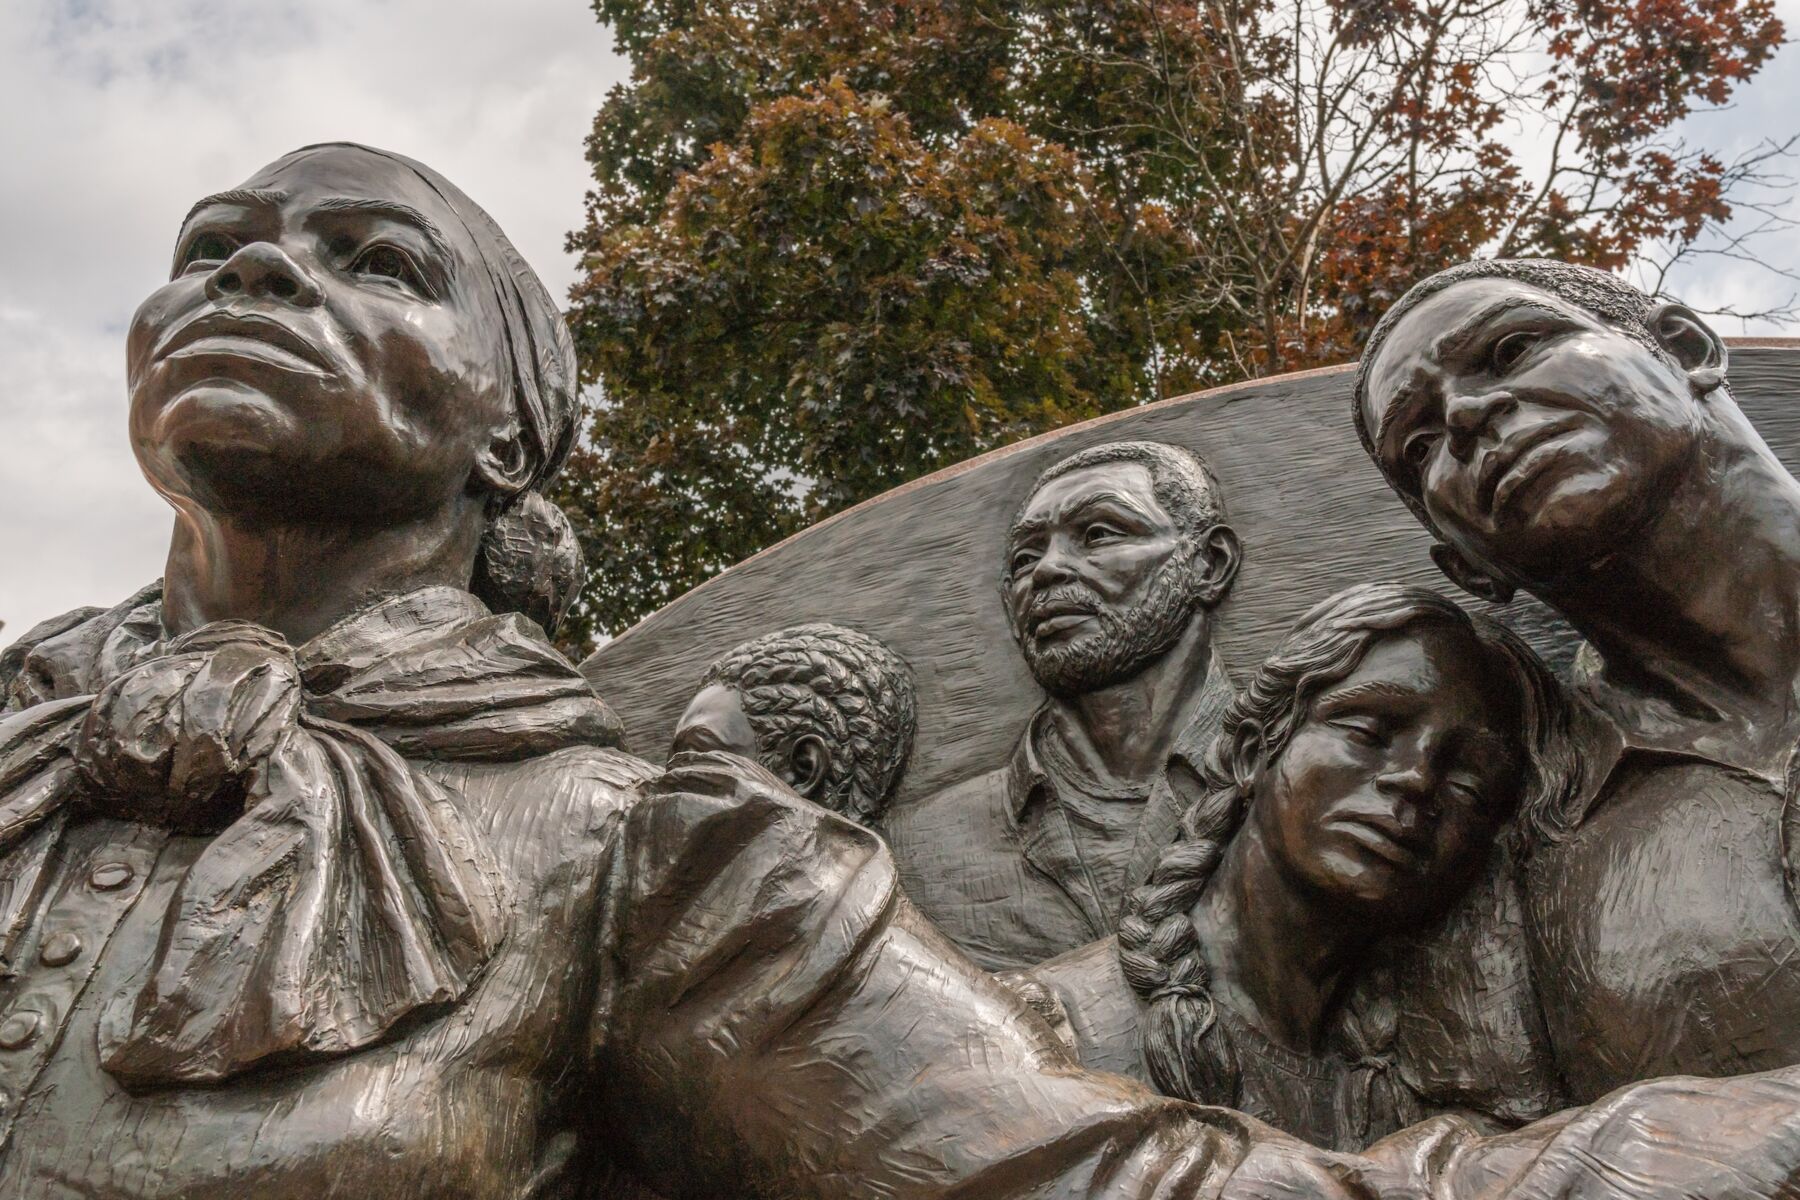 10 ways you can celebrate and learn during Black History Month